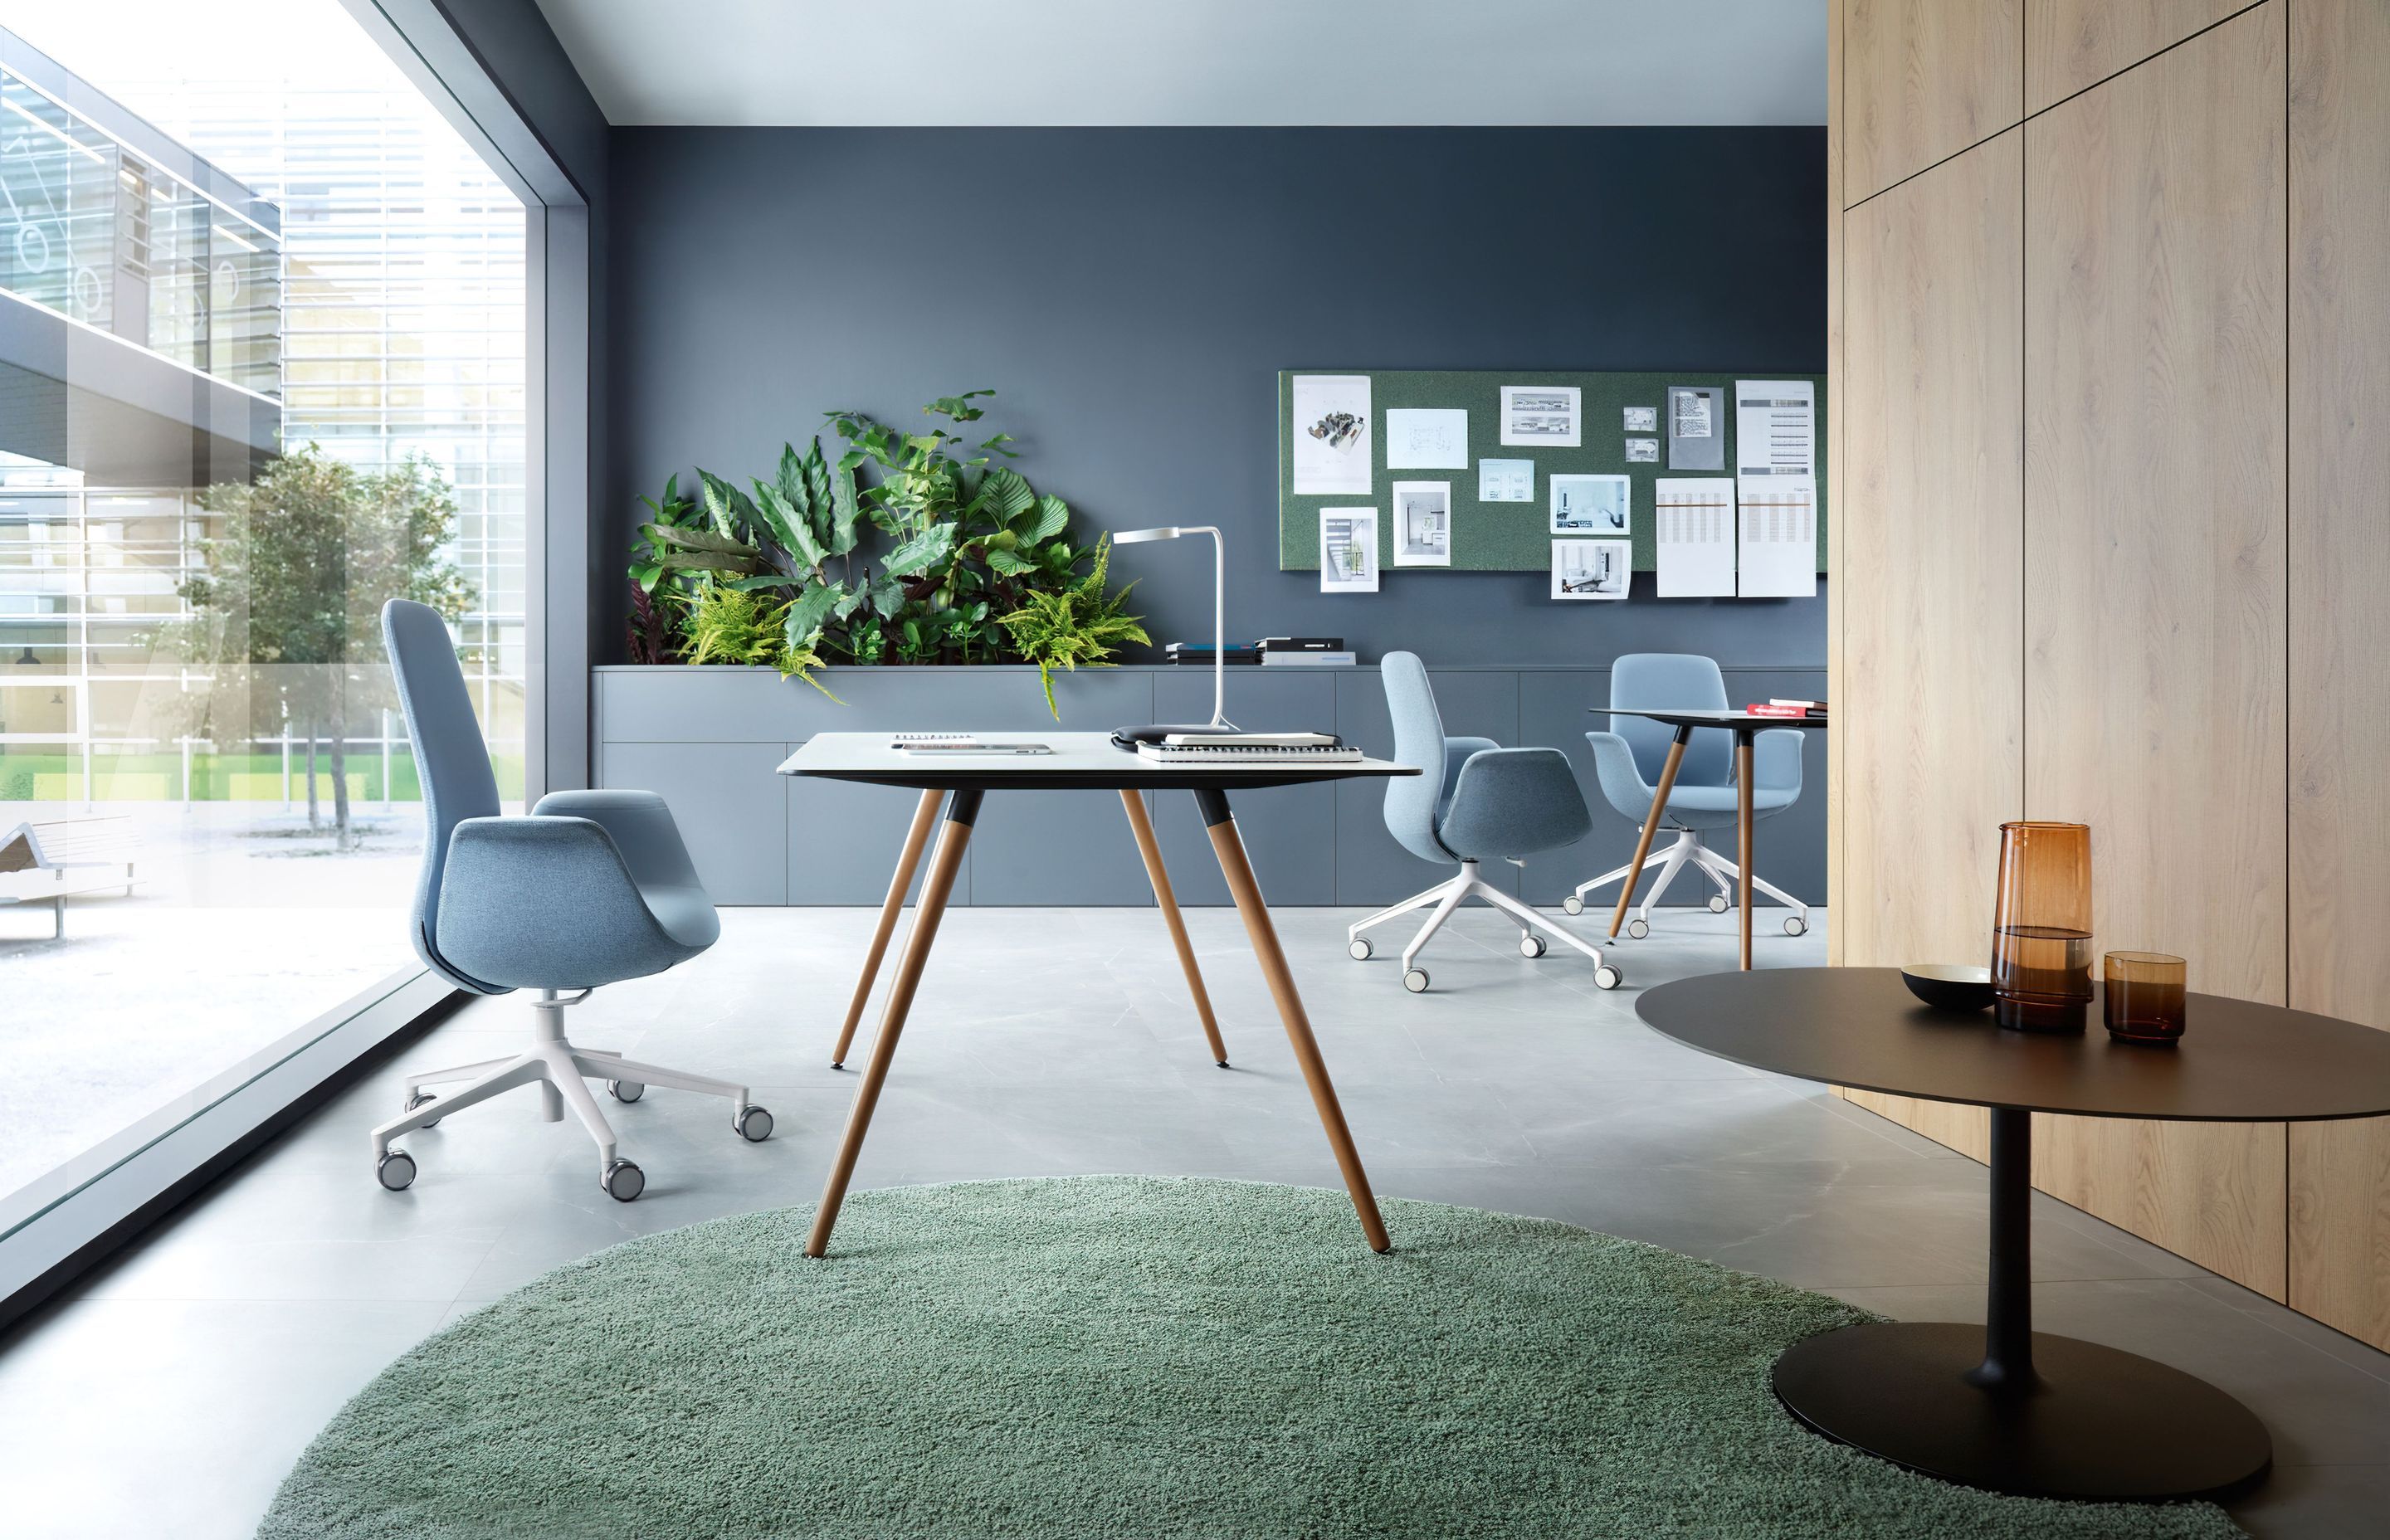 Flokk’s ElliePro chair with self-intuitive regulation mechanism, discreetly incorporated into the seat for quick and easy adjustment.